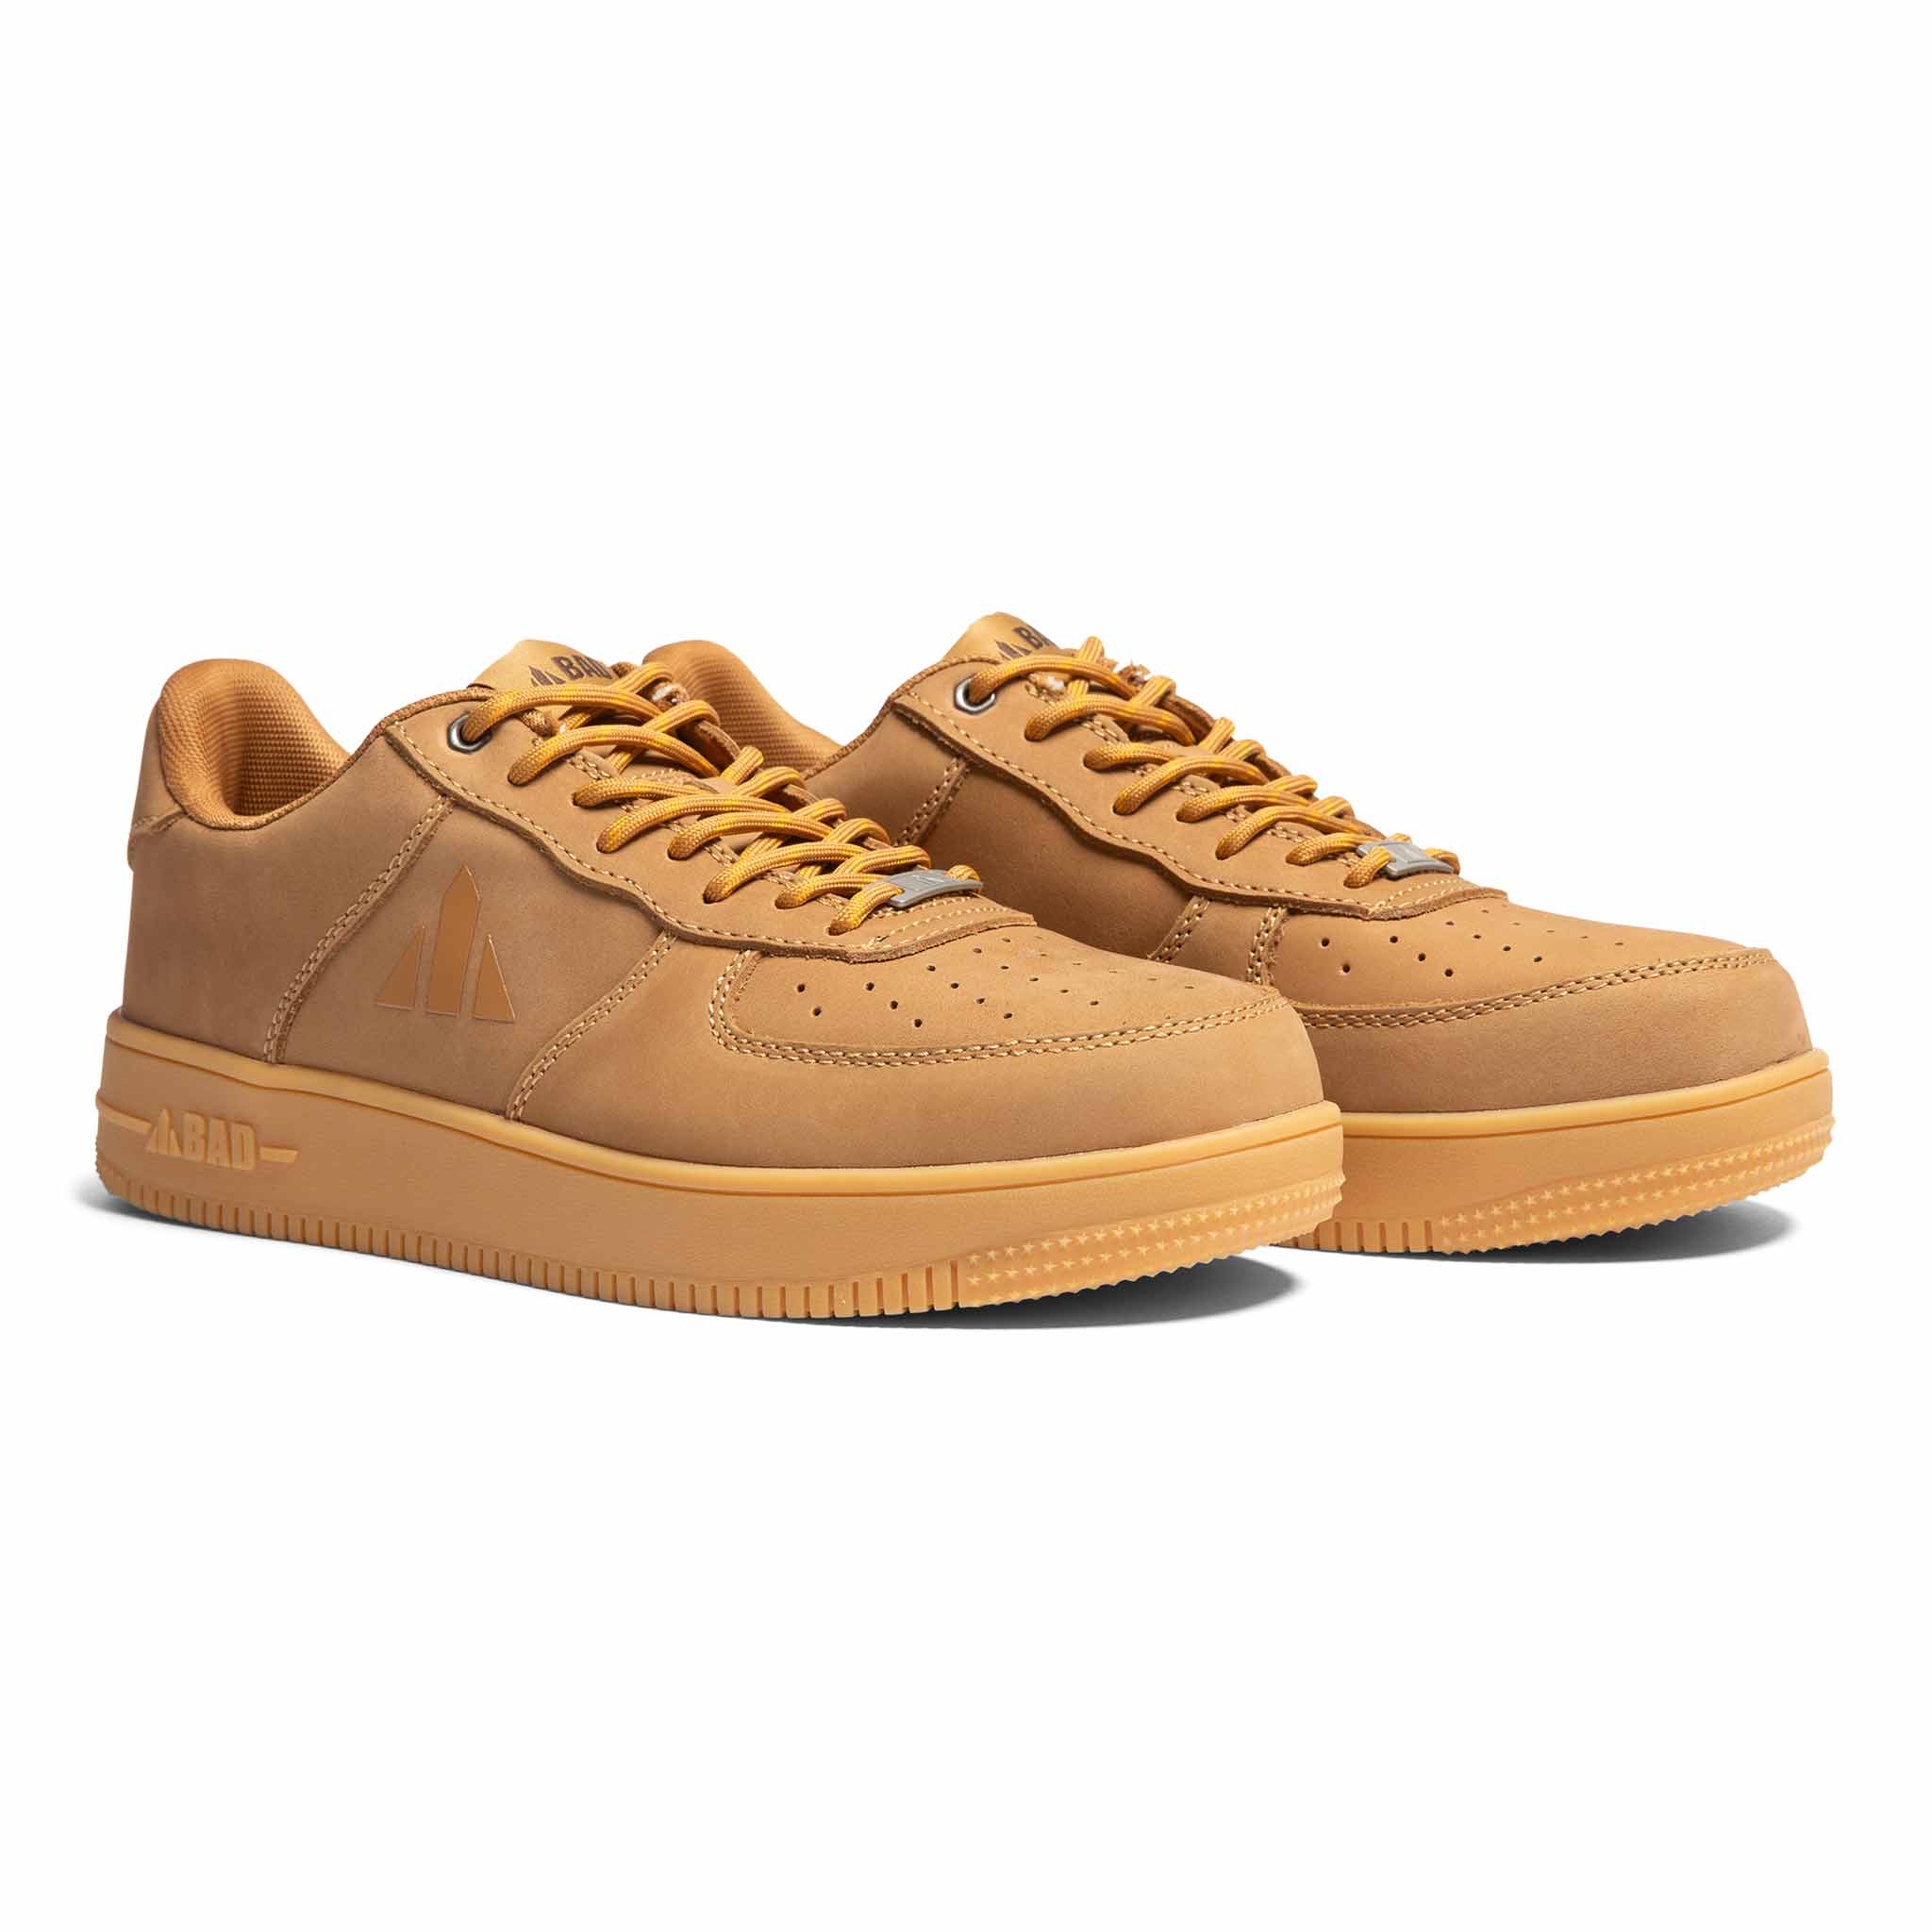 BAD ENERGY™ SAFETY WORK SNEAKERS - 4 / WHEAT